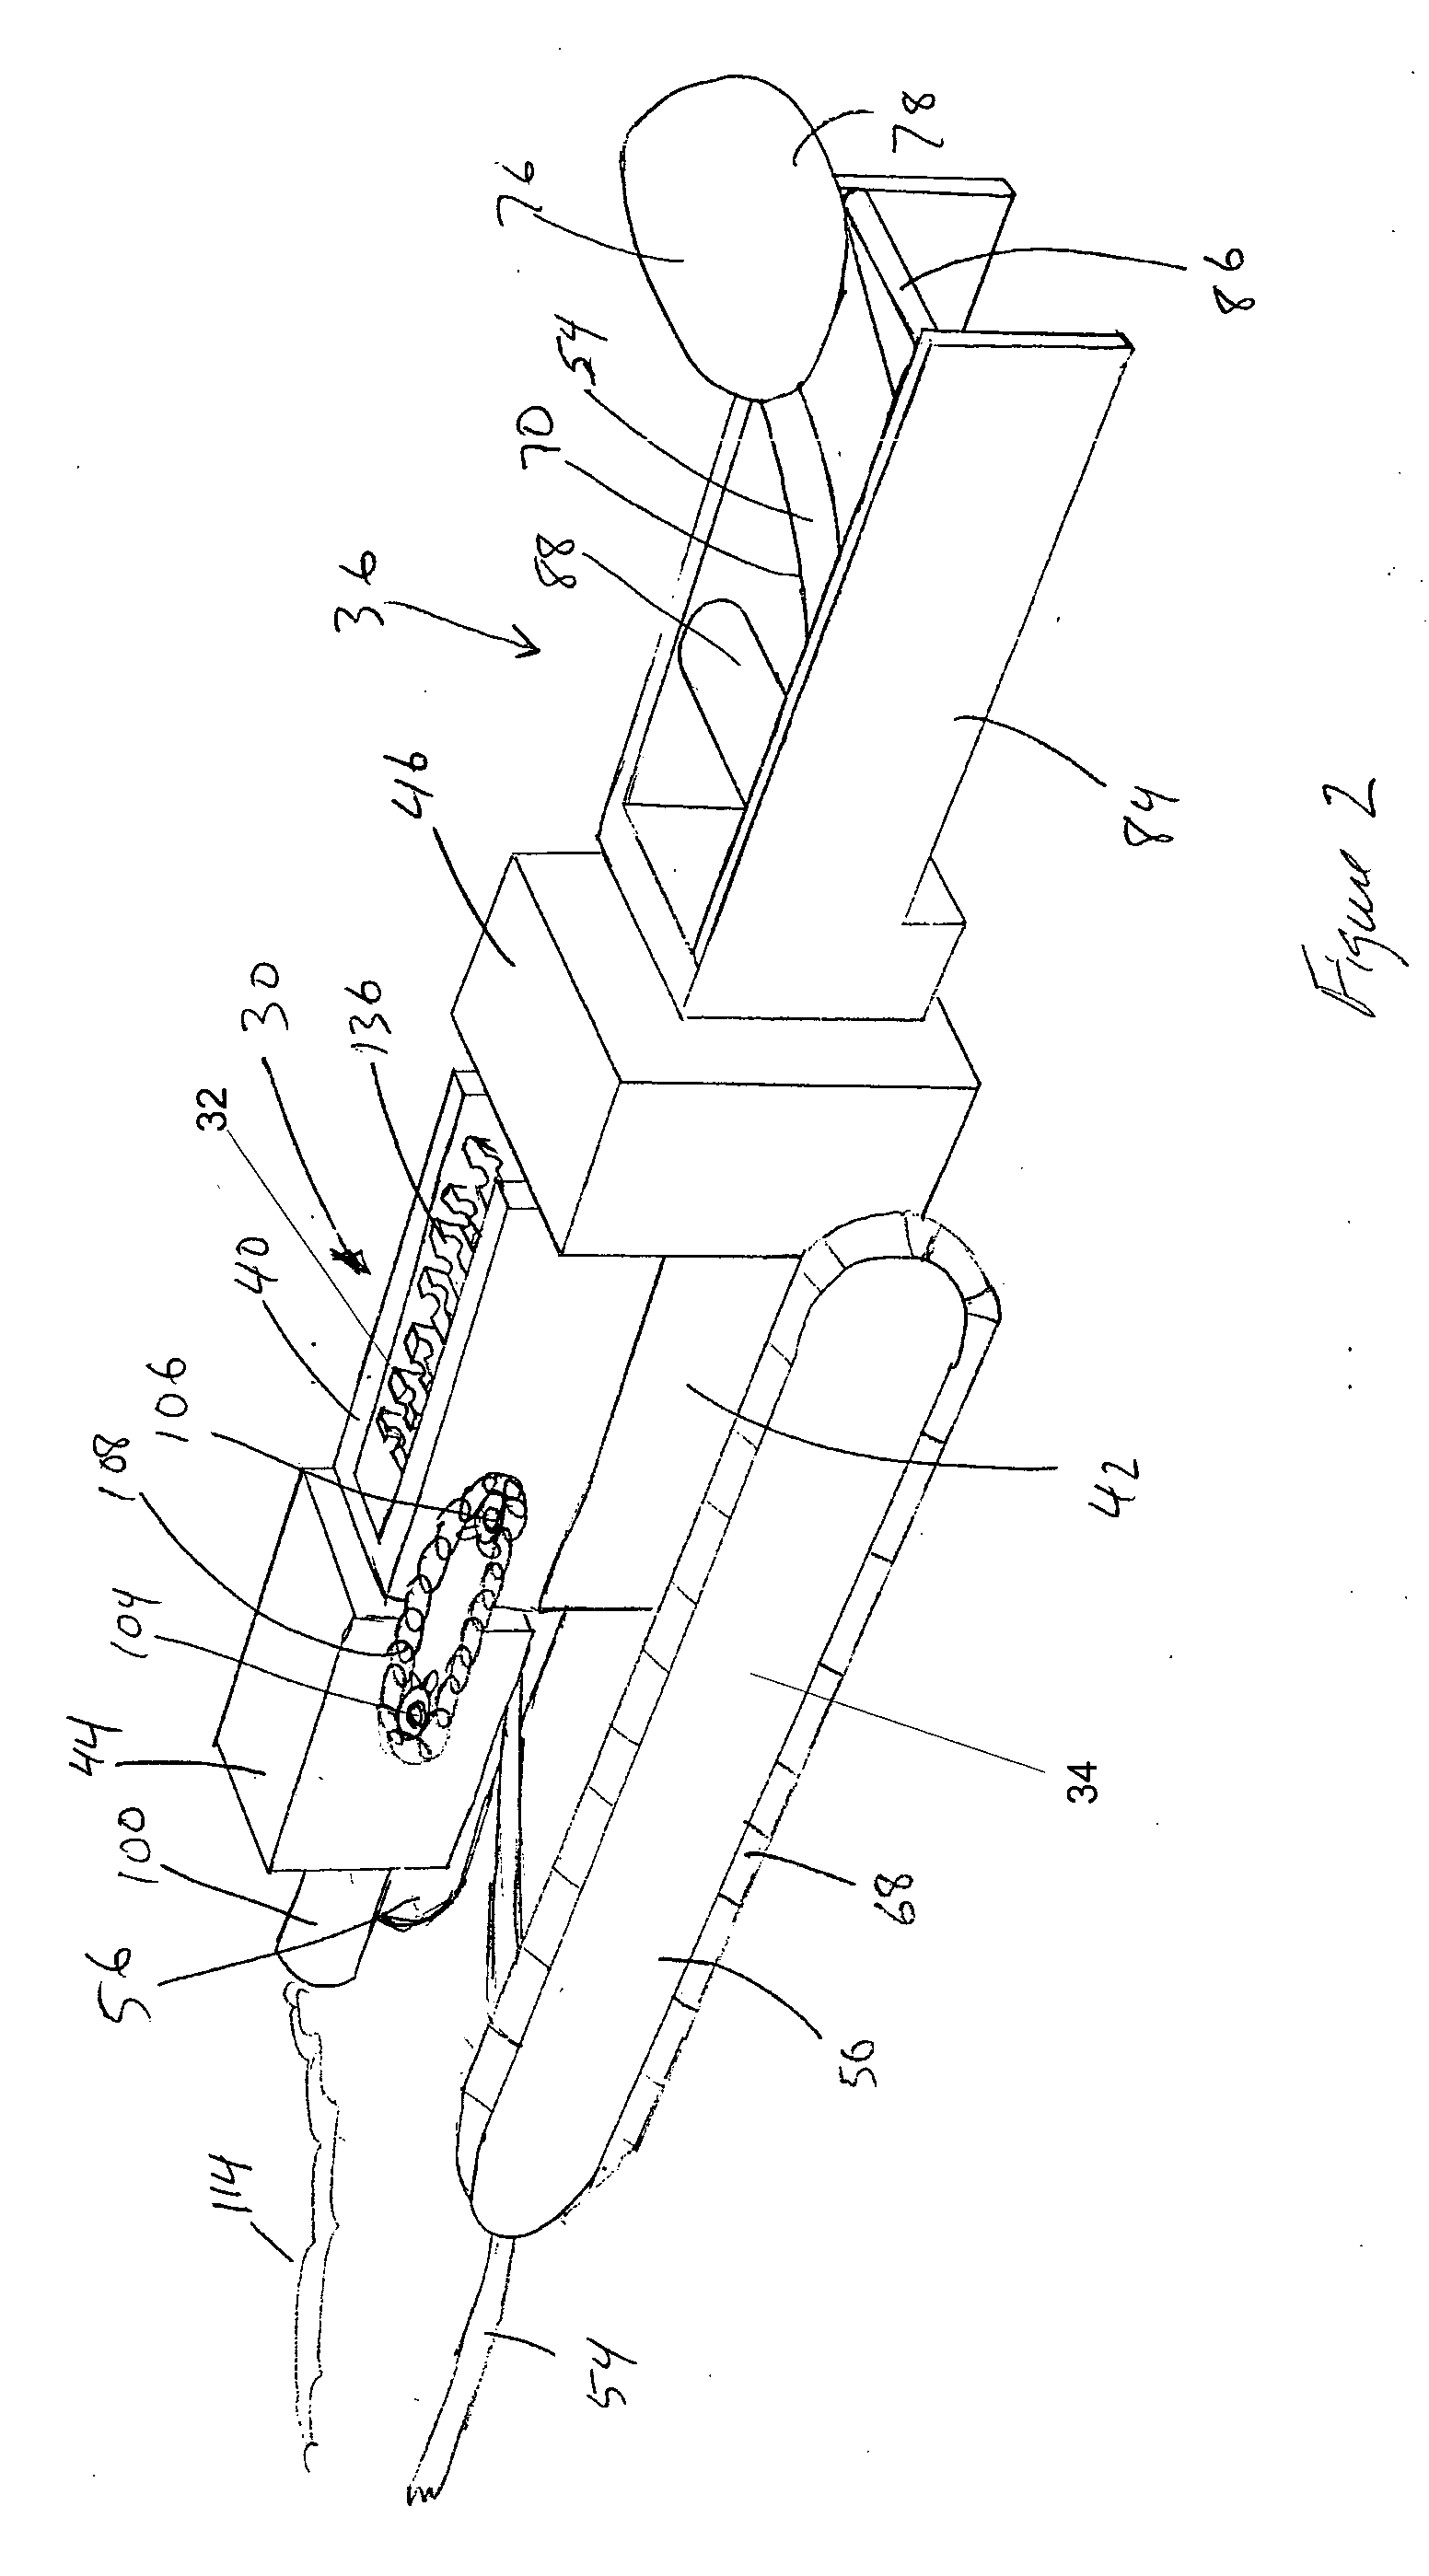 Apparatus for inspecting a lateral conduit